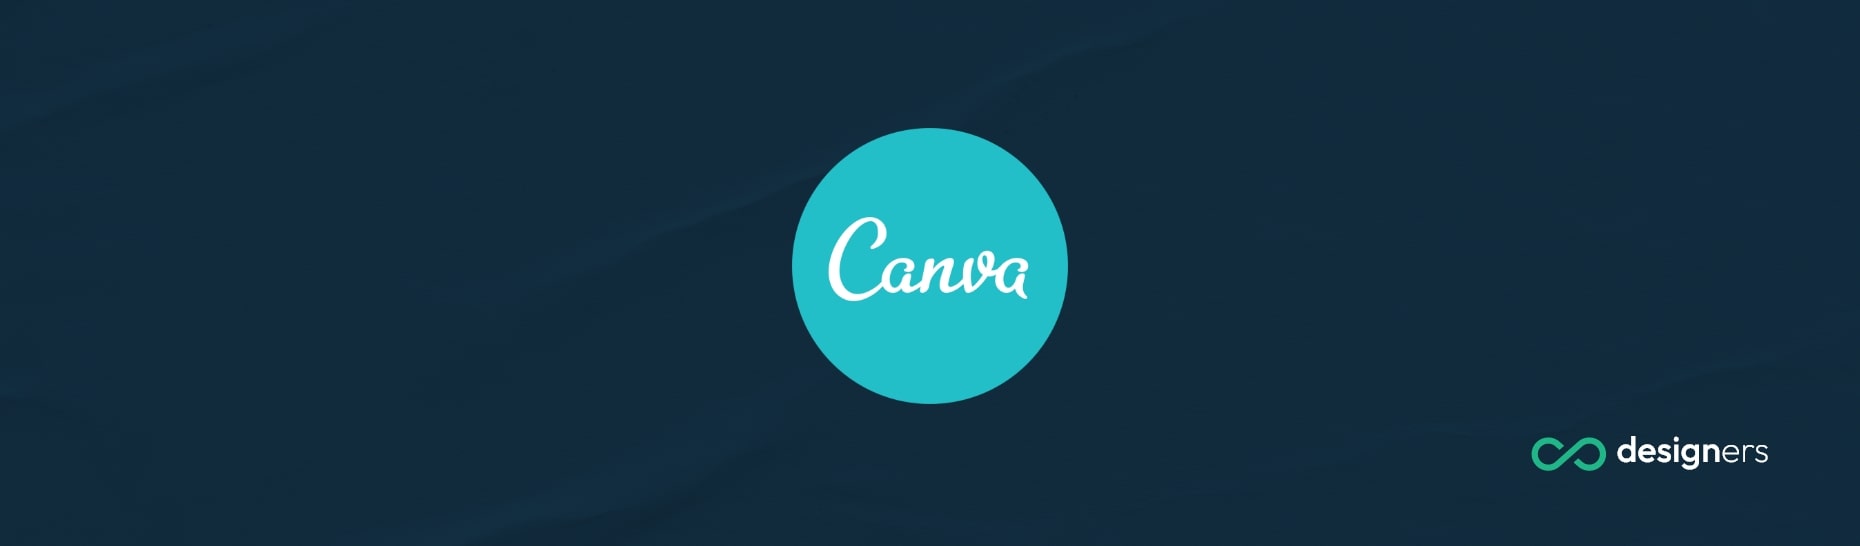 How Do I Curve an Image in Canva?